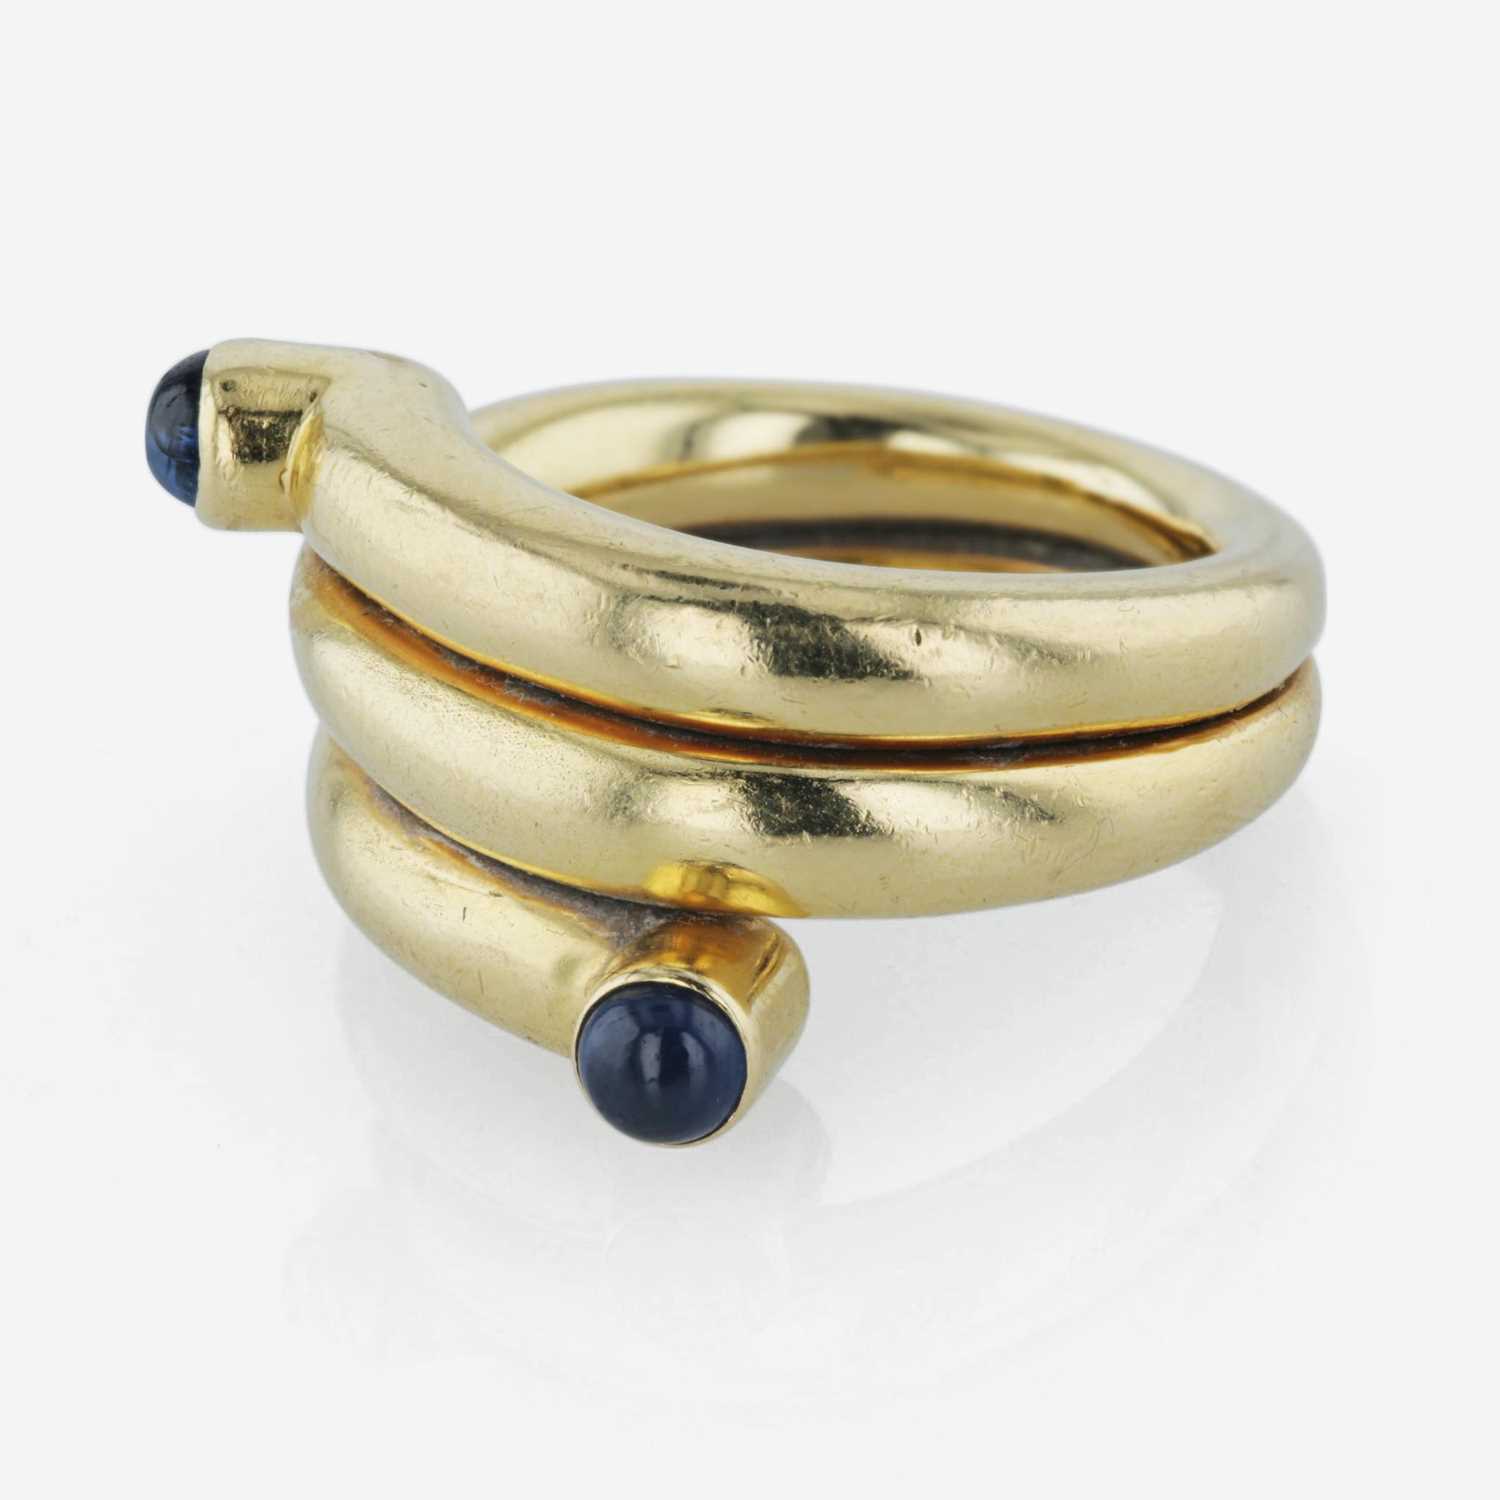 Lot 43 - An 18K yellow gold and sapphire ring, Tiffany & Co.